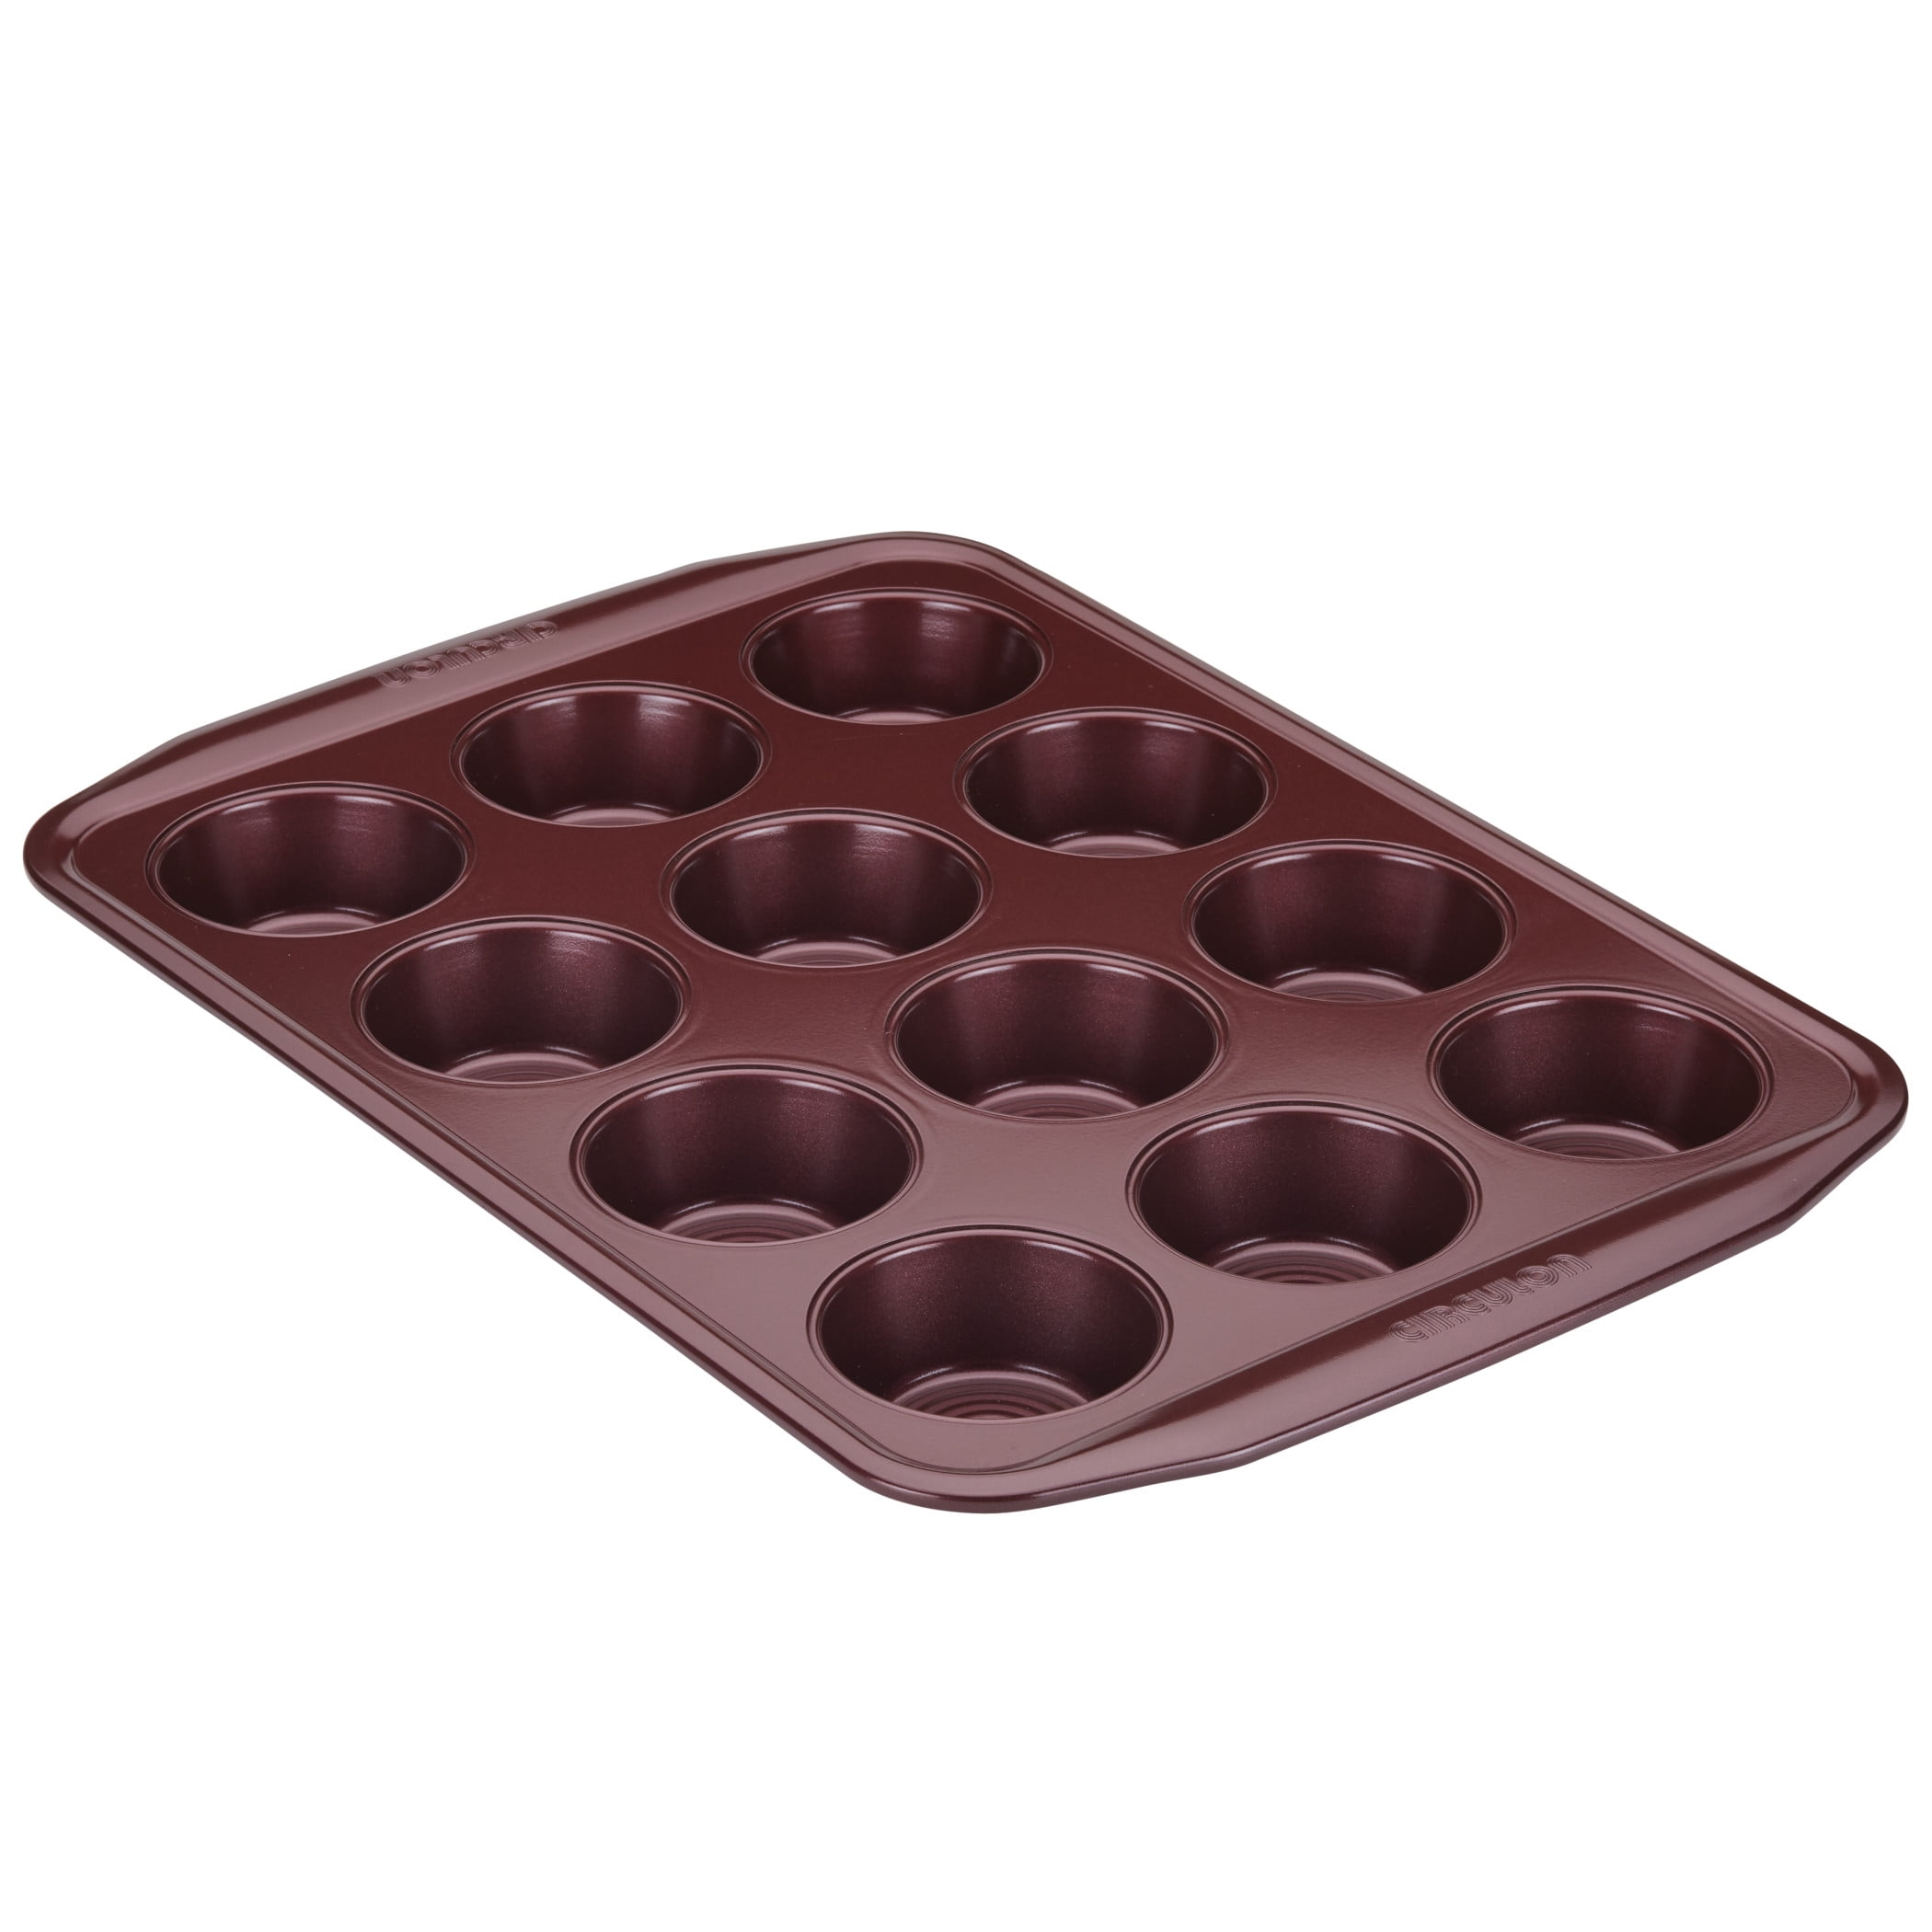 Copper Muffin Pan 12 Cups - Premium Healthy Nonstick Muffin Pan,Even  Baking, Dishwasher and Oven Safe